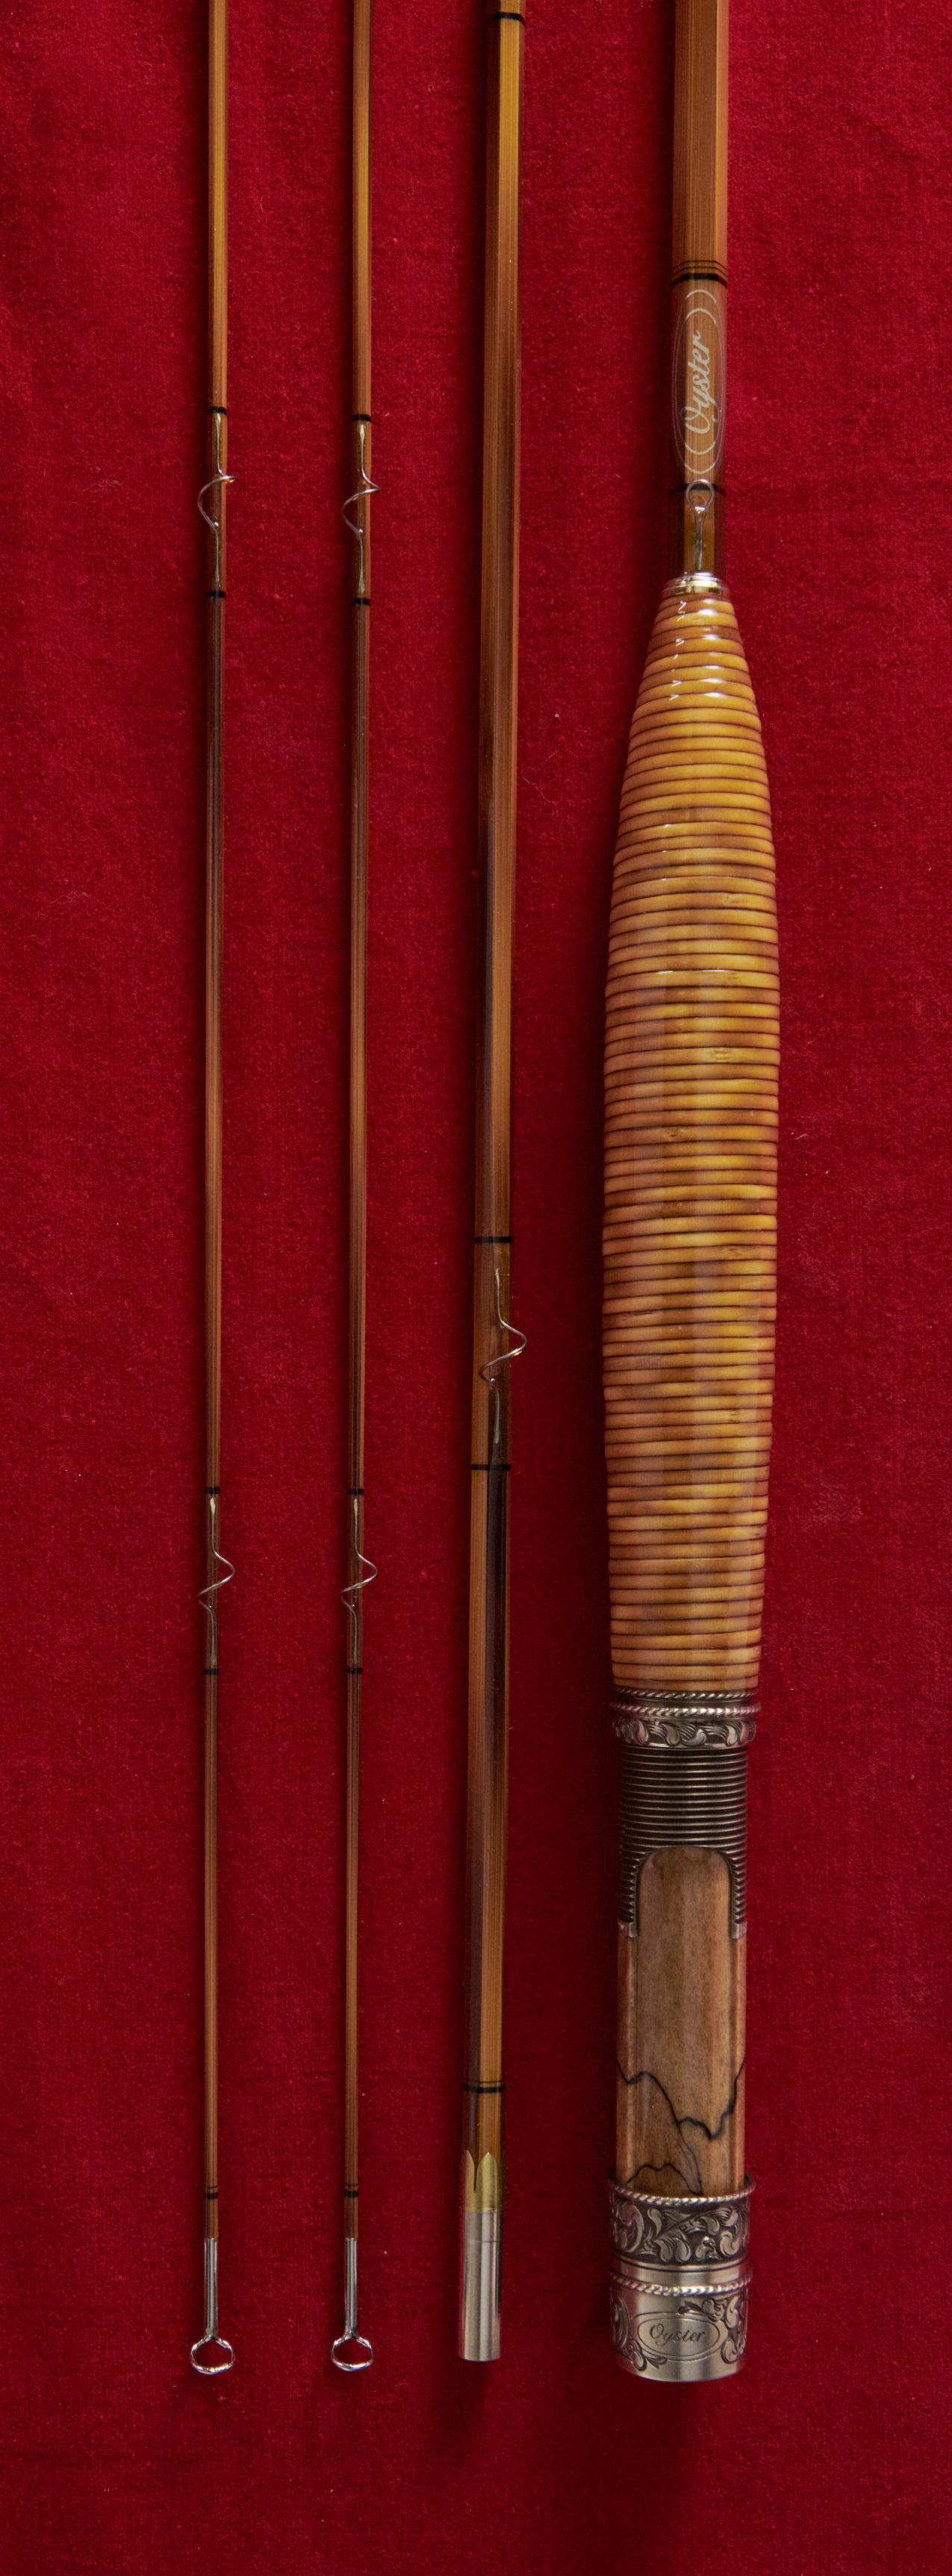 Bamboo fly rod for sale - Oyster Fine Bamboo Fly Rod 7'6 4wt